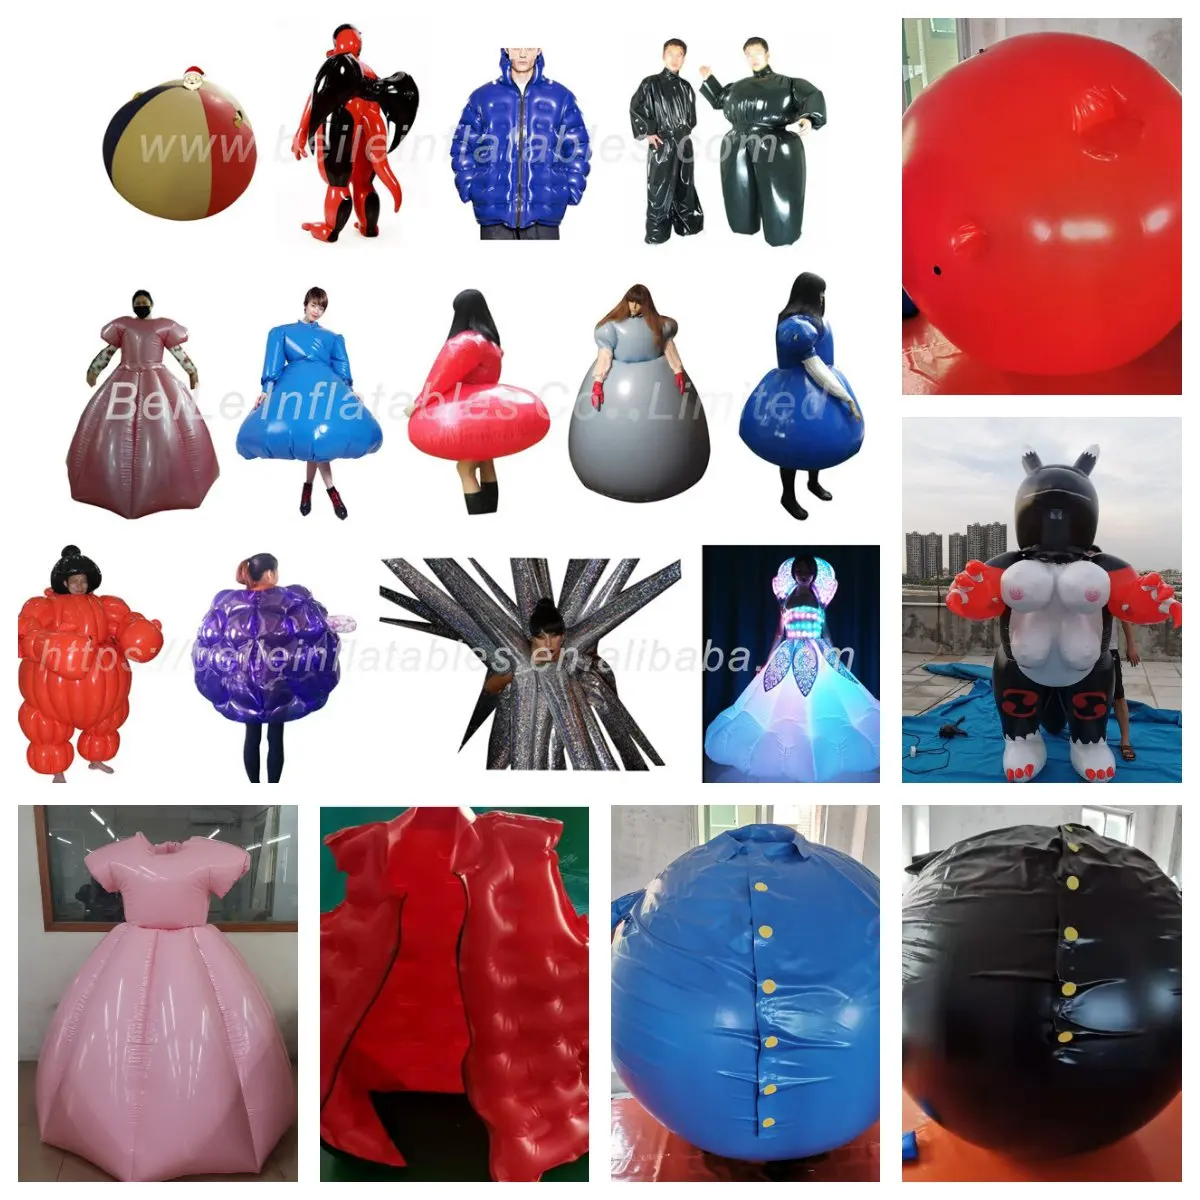 Customize High Quality Pvc Inflatable Blueberry Suit For Role Play